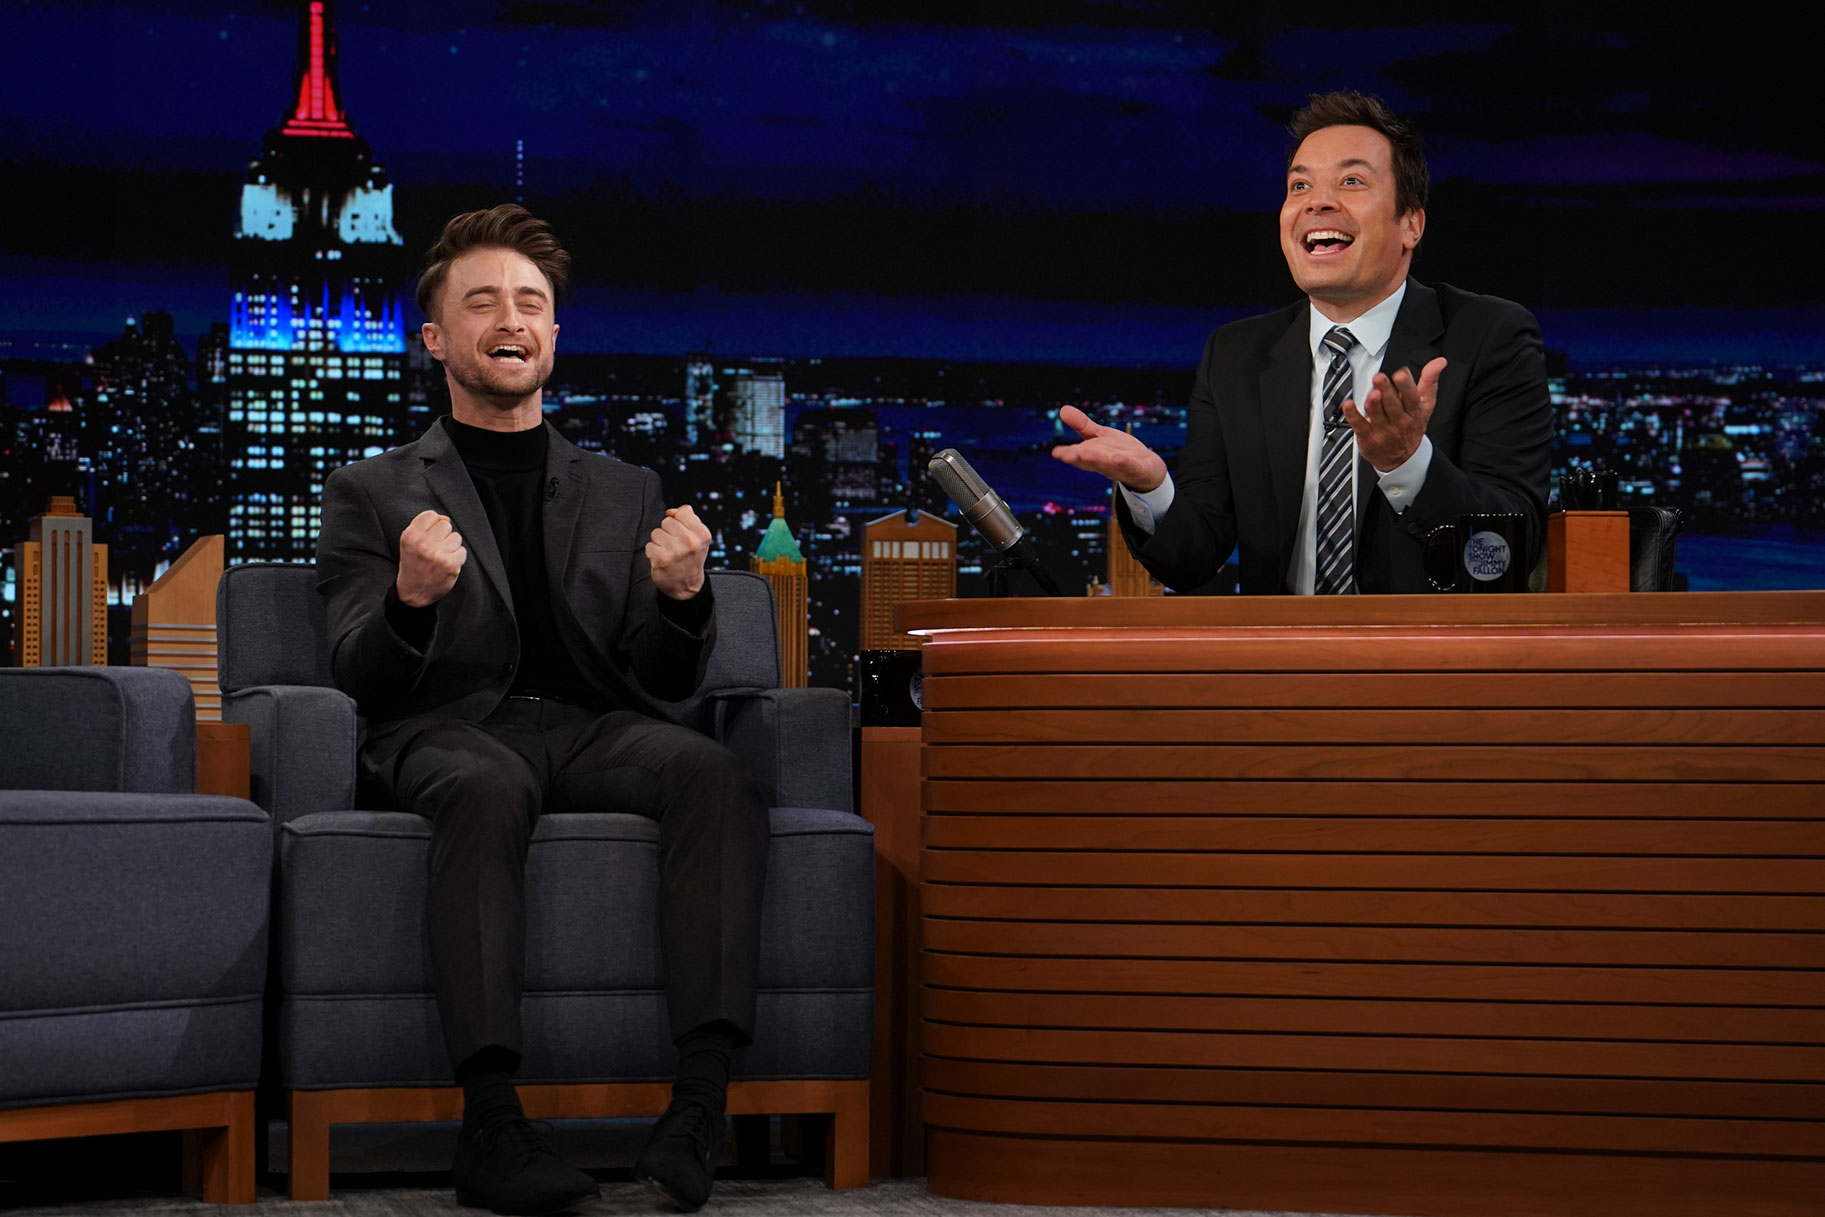 Daniel Radcliffe on The Tonight Show with Jimmy Fallon